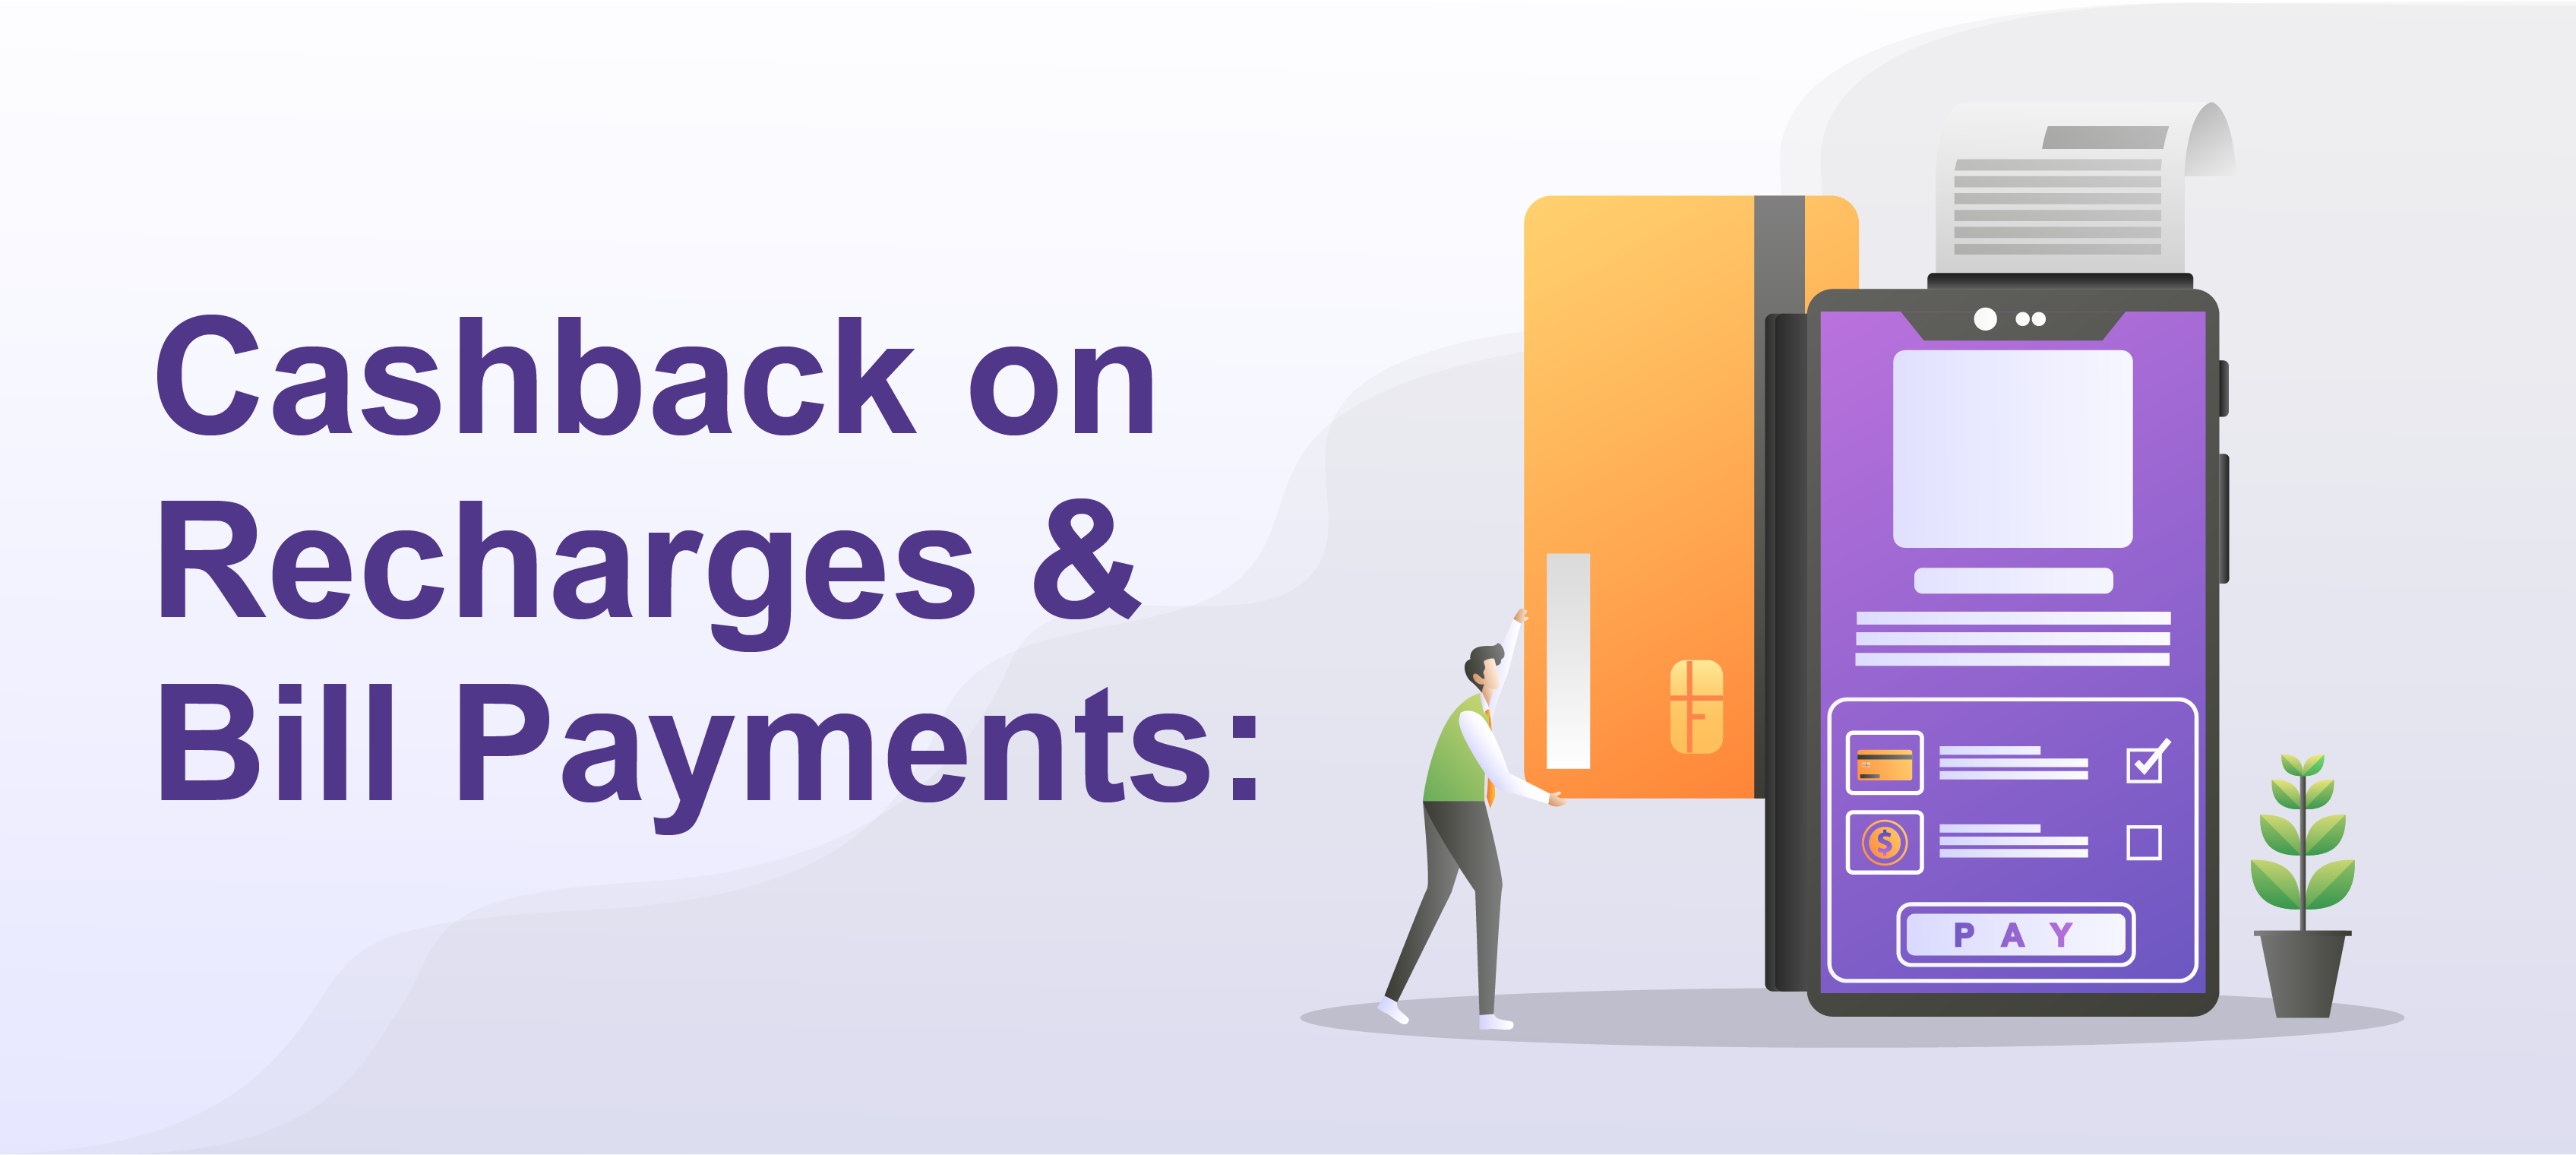 Save on Cashback on Recharges and Bill Payments